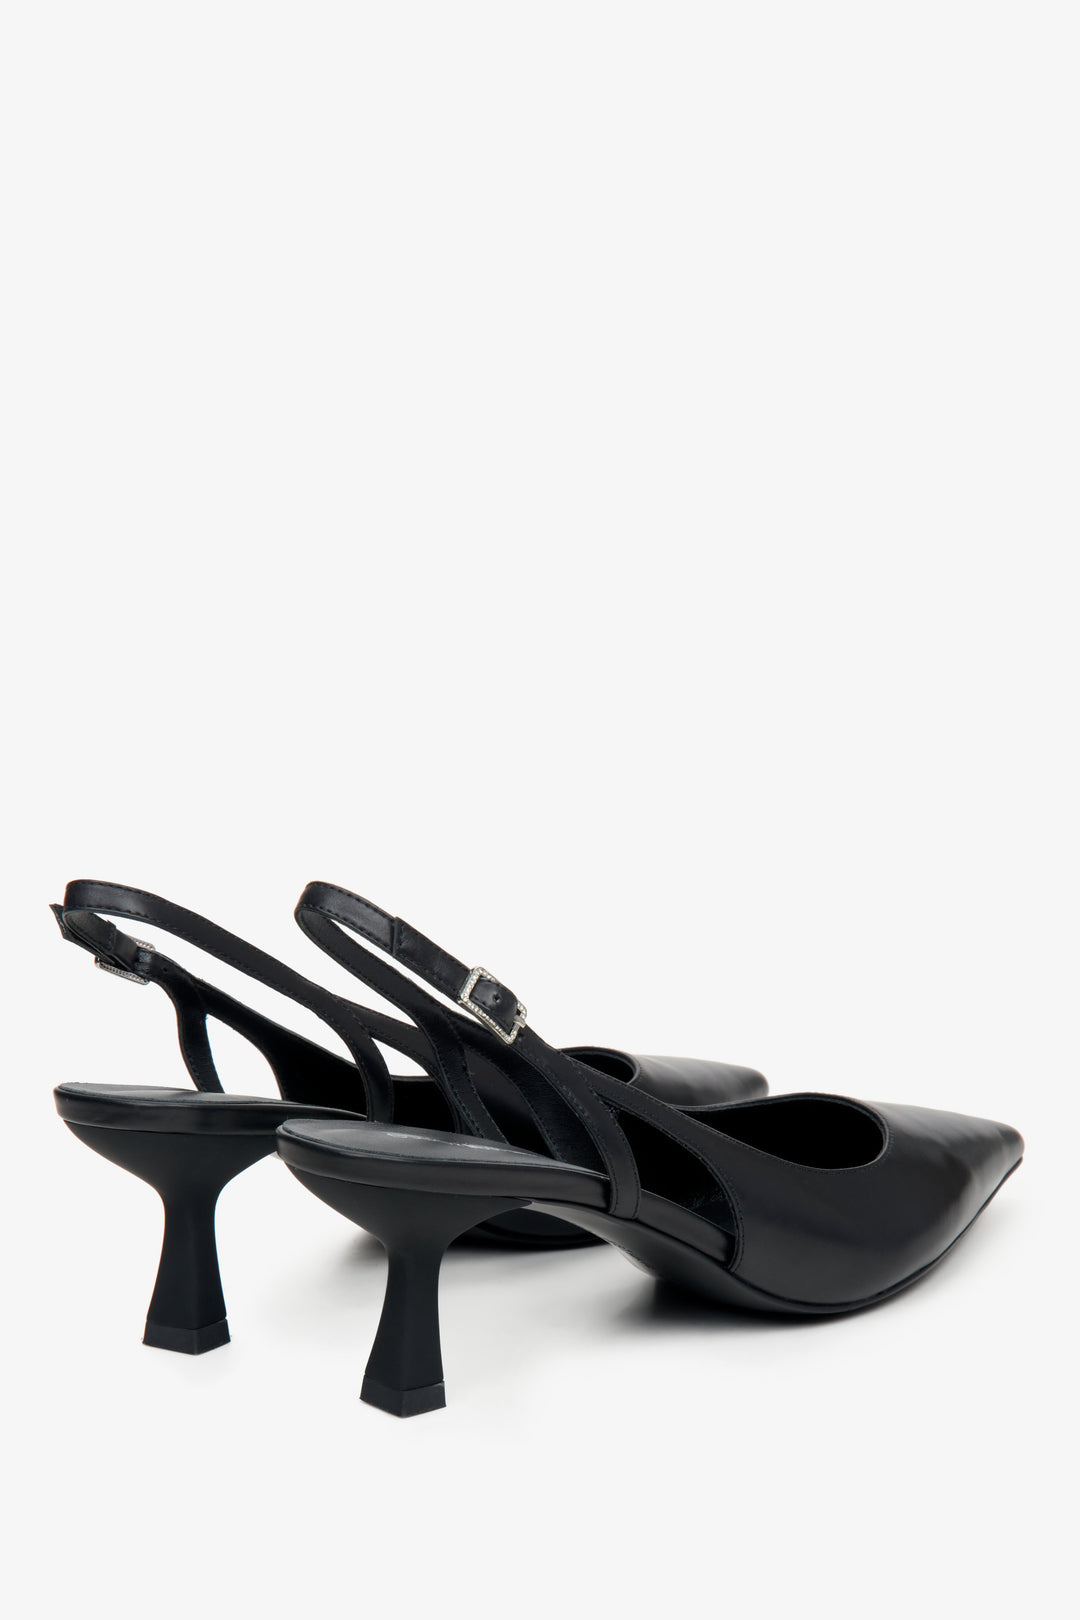 Estro X MustHave women's slingback pumps in black genuine leather - close-up on the heel and side line of the shoes.